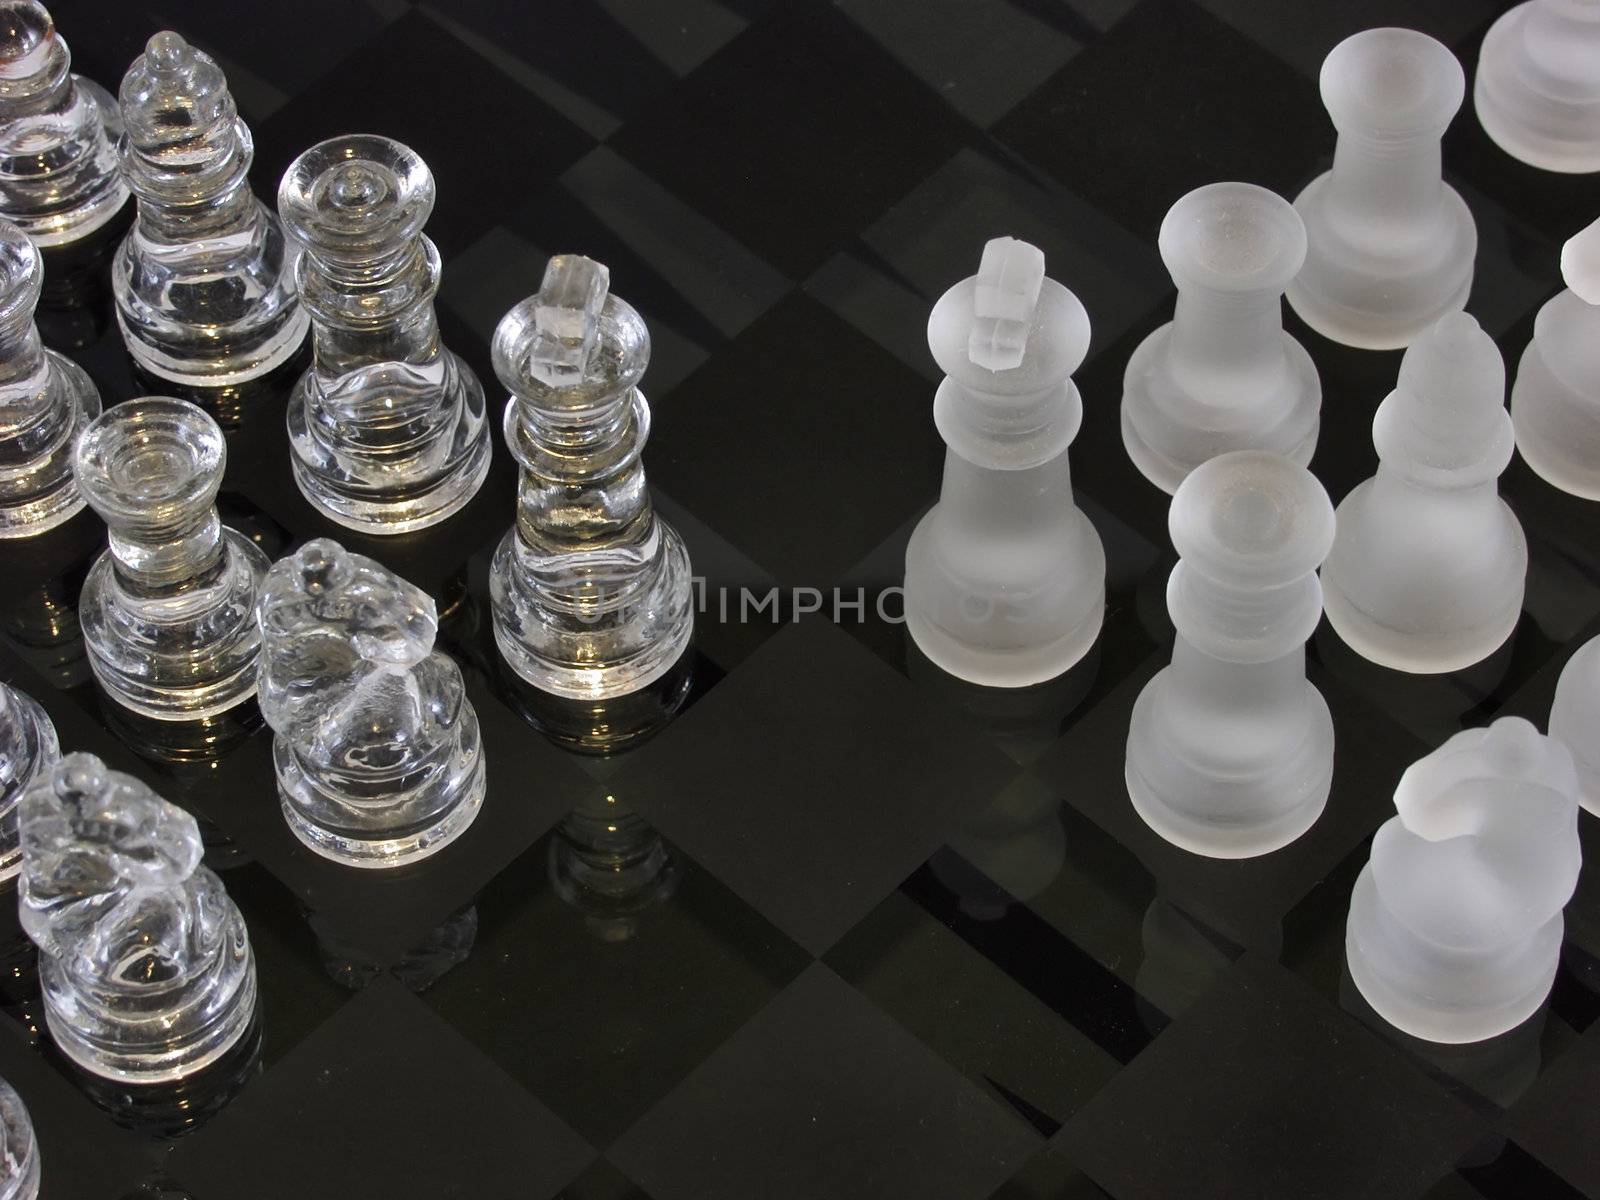 Frosted and clear chess pieces on a glass chessboard. Note the backgammon markings below the surface of the glass.